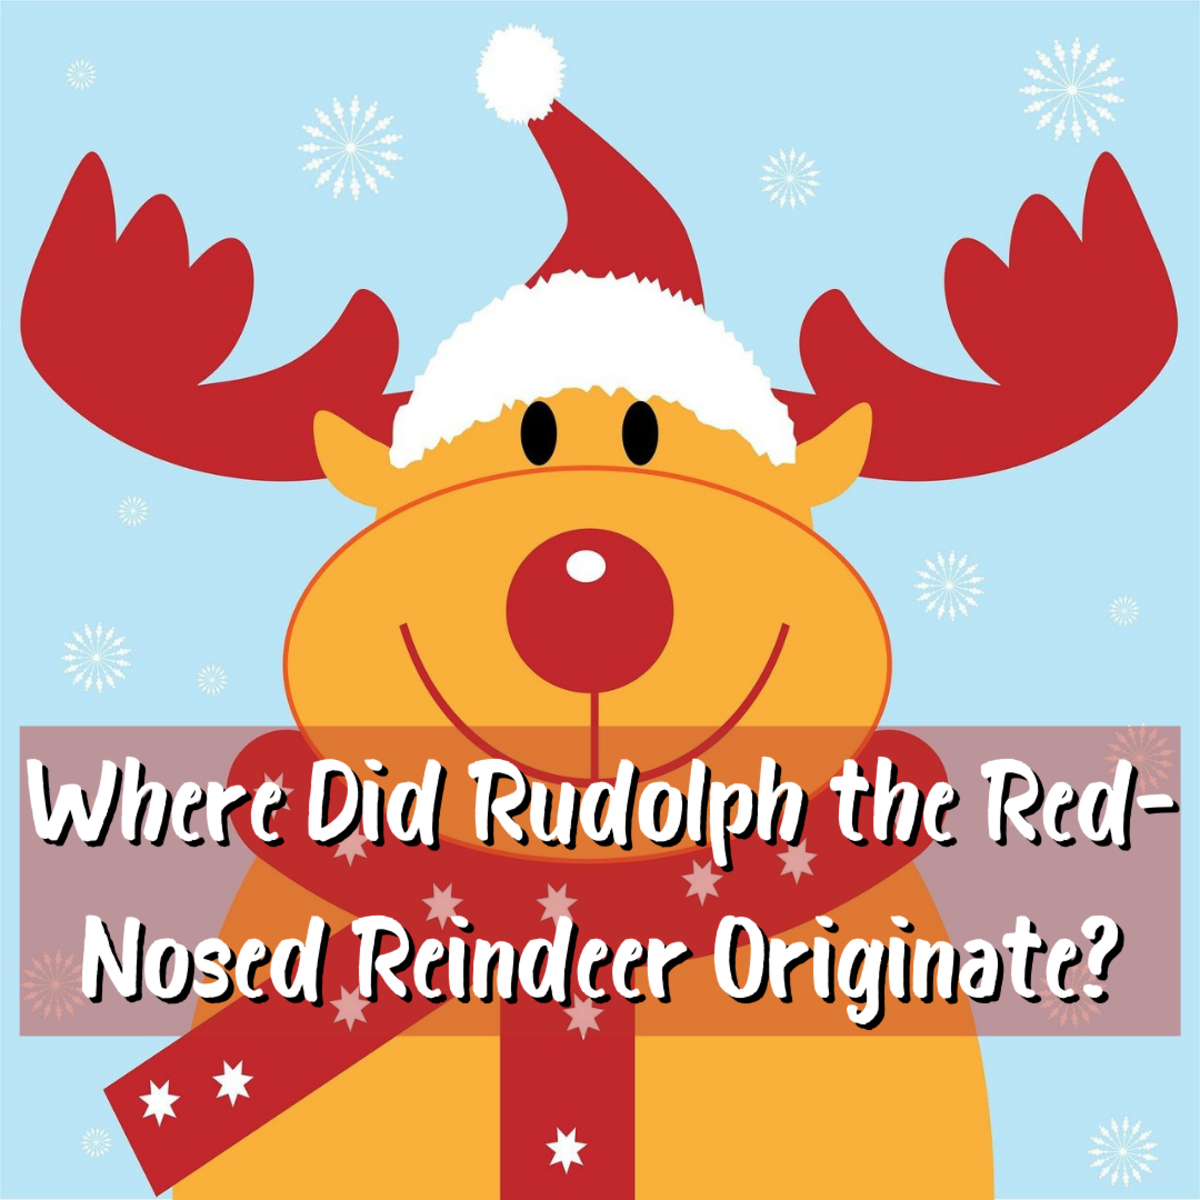 Read on to learn about the creators of Rudolph the Red-Nosed Reindeer, Aaron Montgomery Ward and Robert L. May. Rudolph is a beloved Christmas icon and his history deserves to be known.